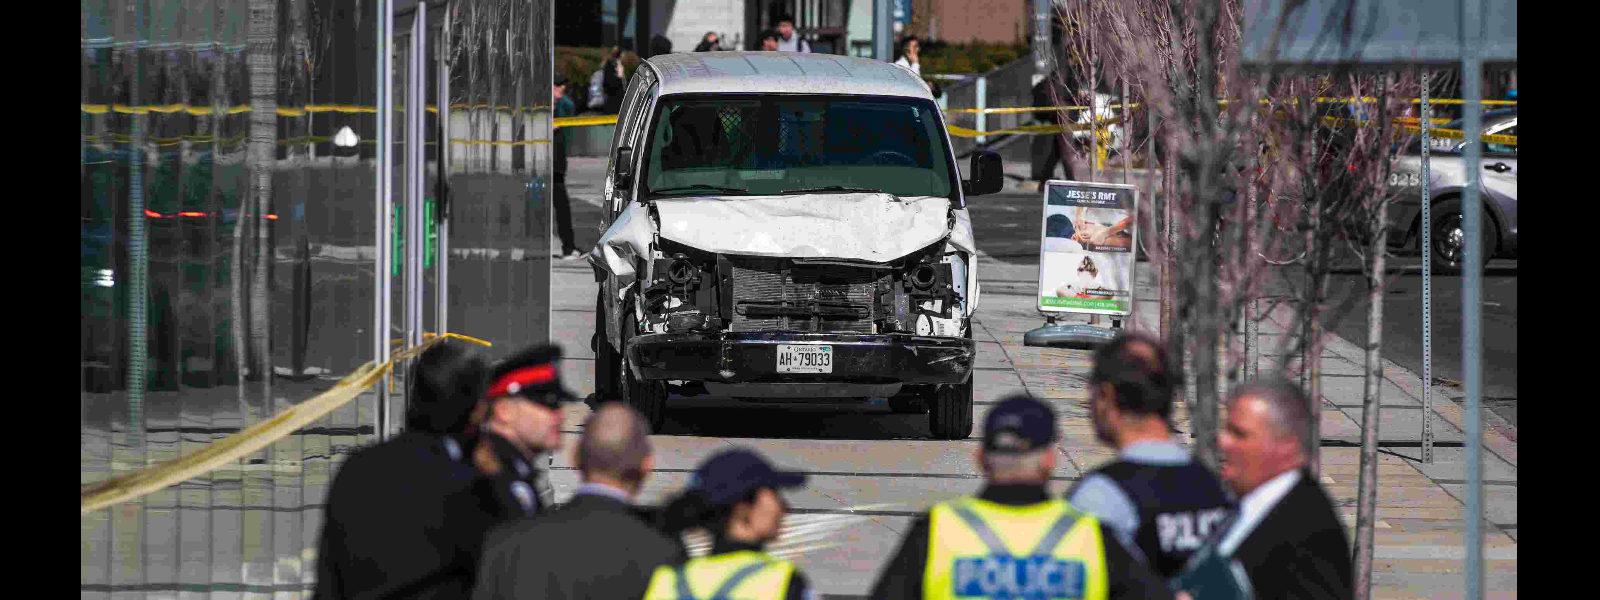 SL woman among victims in Toronto accident